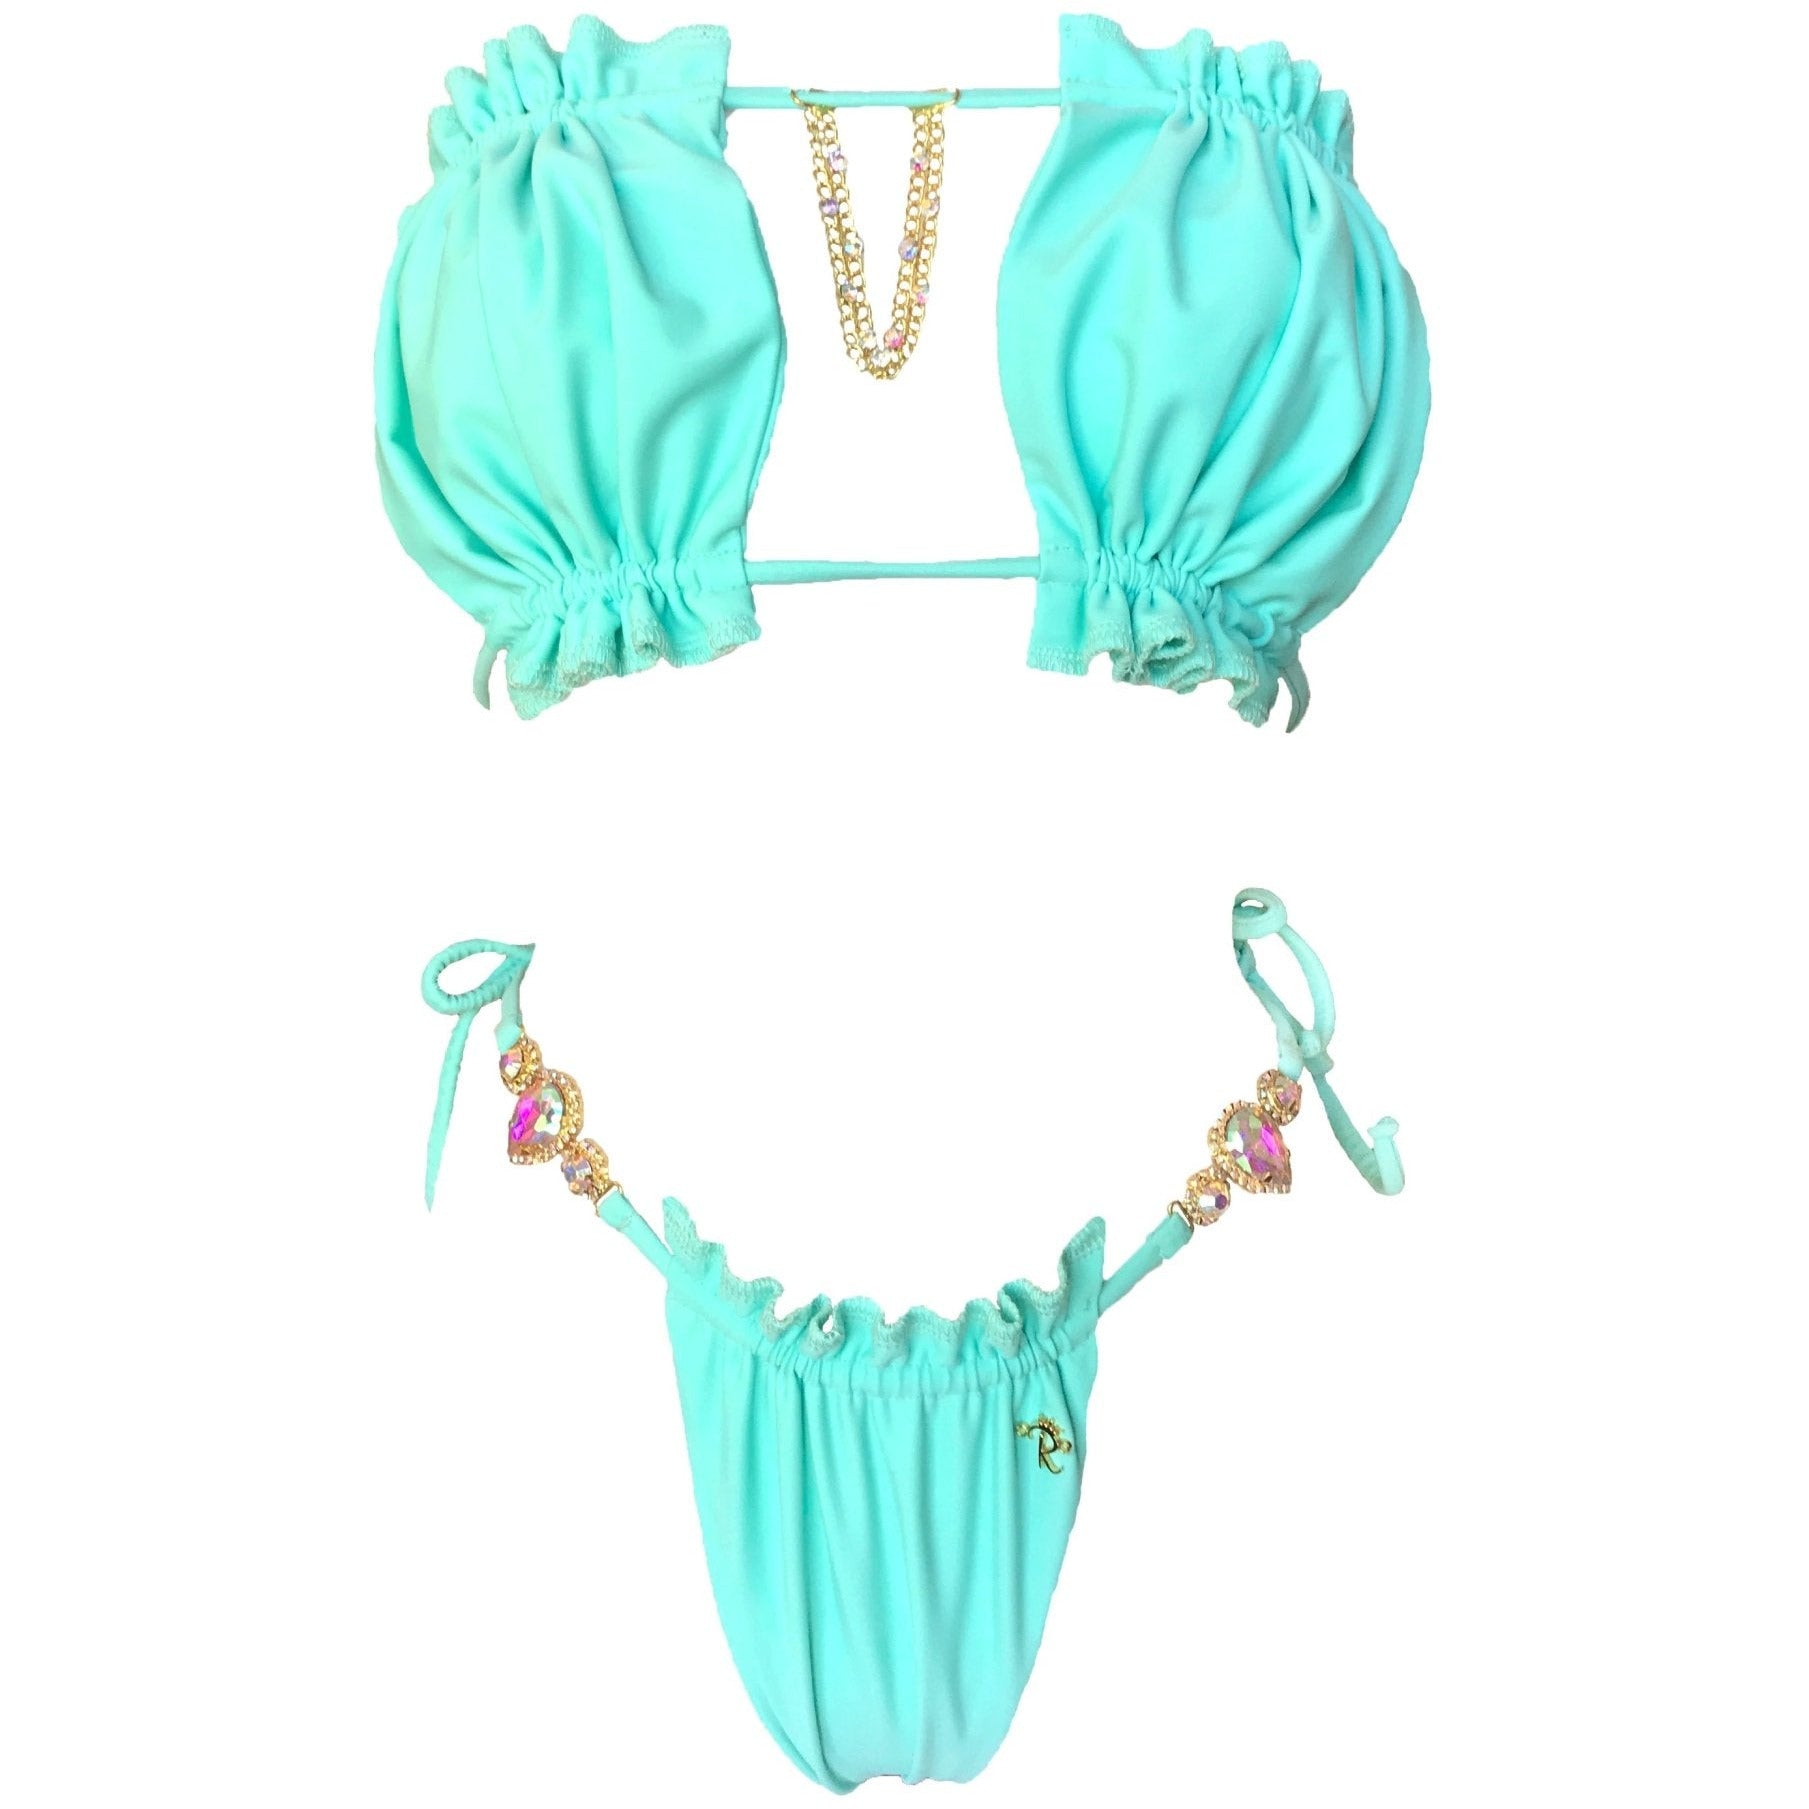 LUXE Candy Bandeau Top & Thong Bottom - Mint Green Bikini - KME means the very best